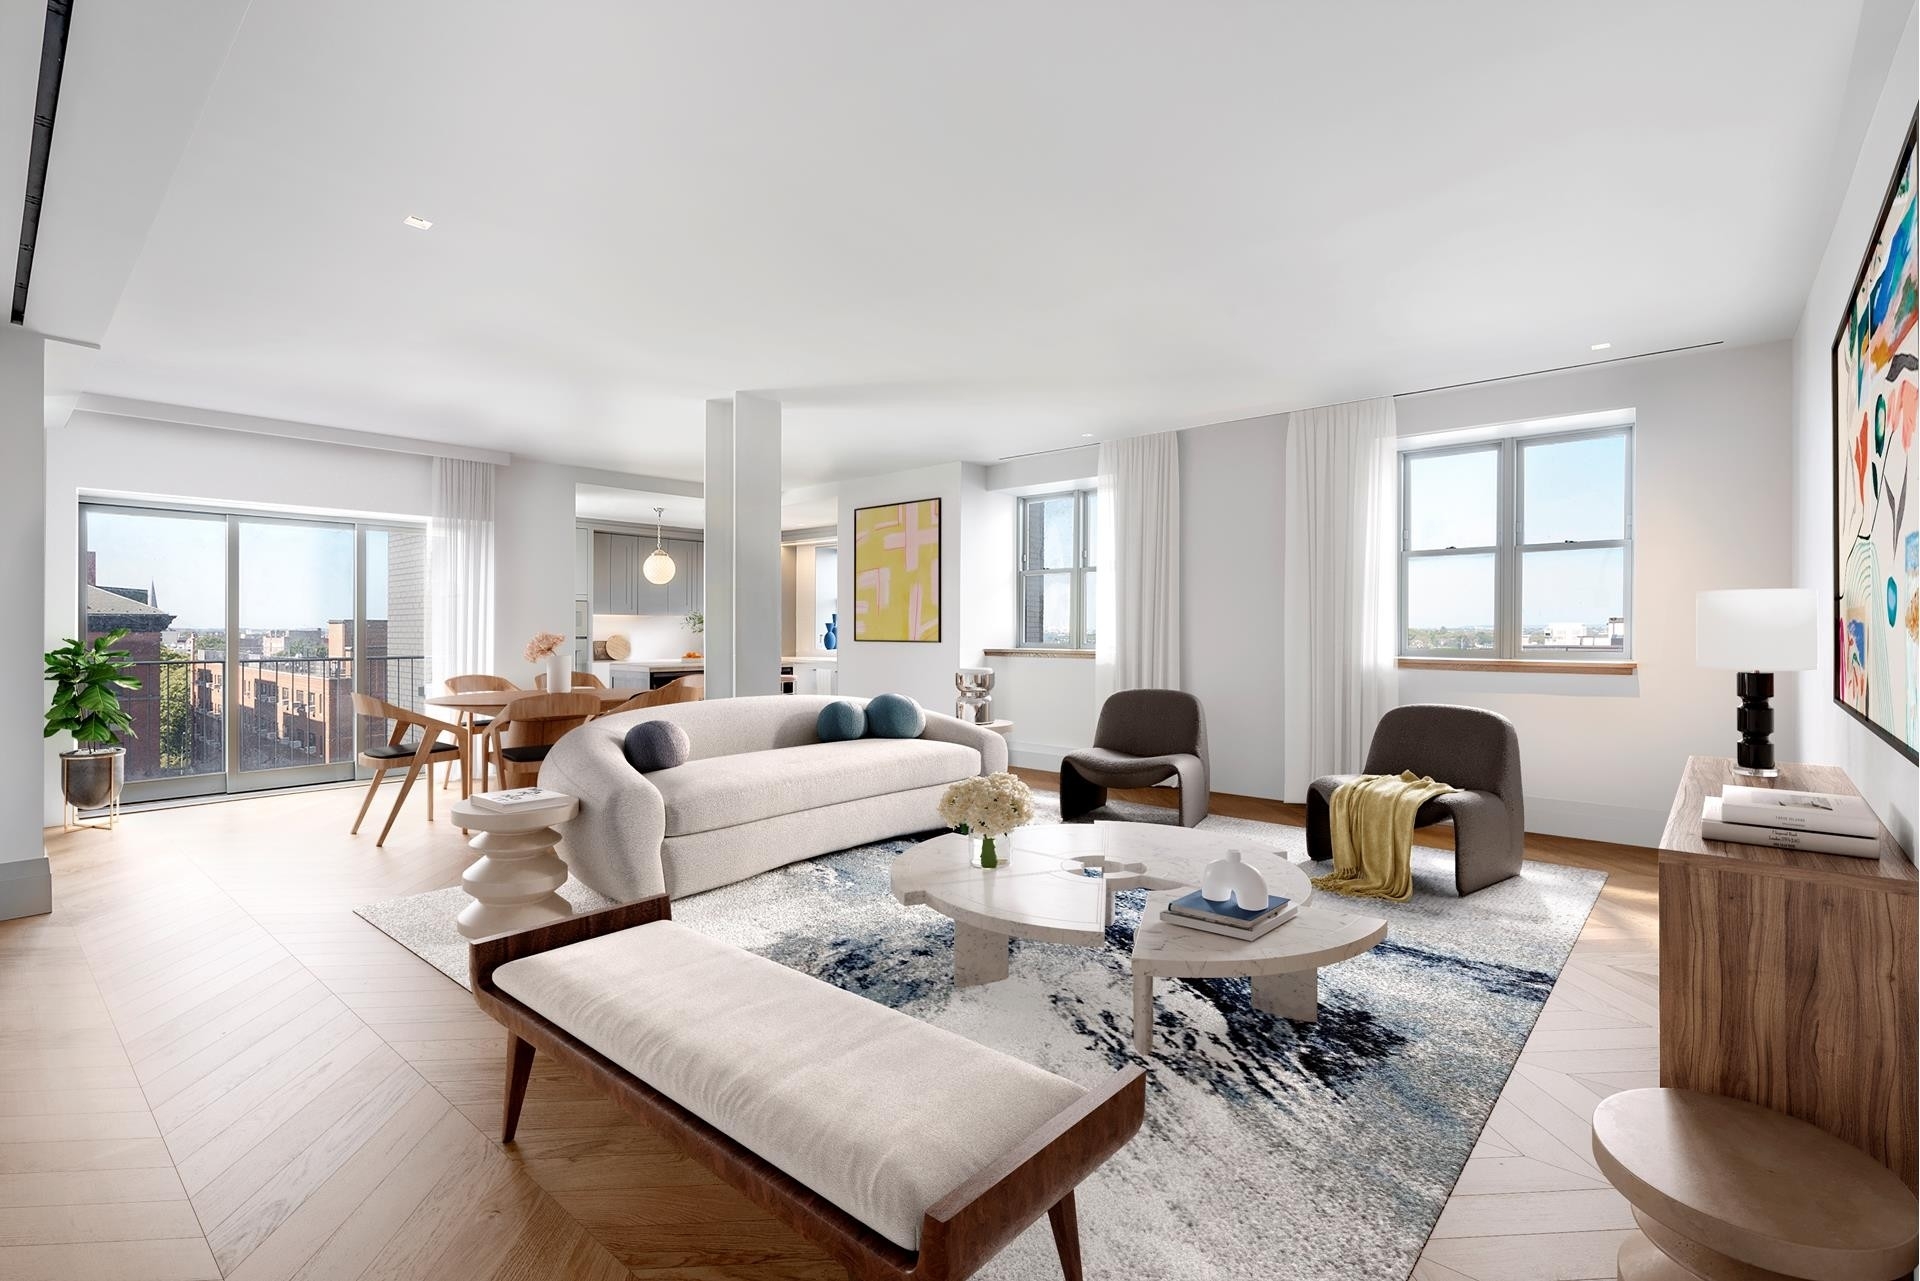 Condominium for Sale at Polhemus, 100 AMITY ST, 5A Cobble Hill, Brooklyn, New York 11201